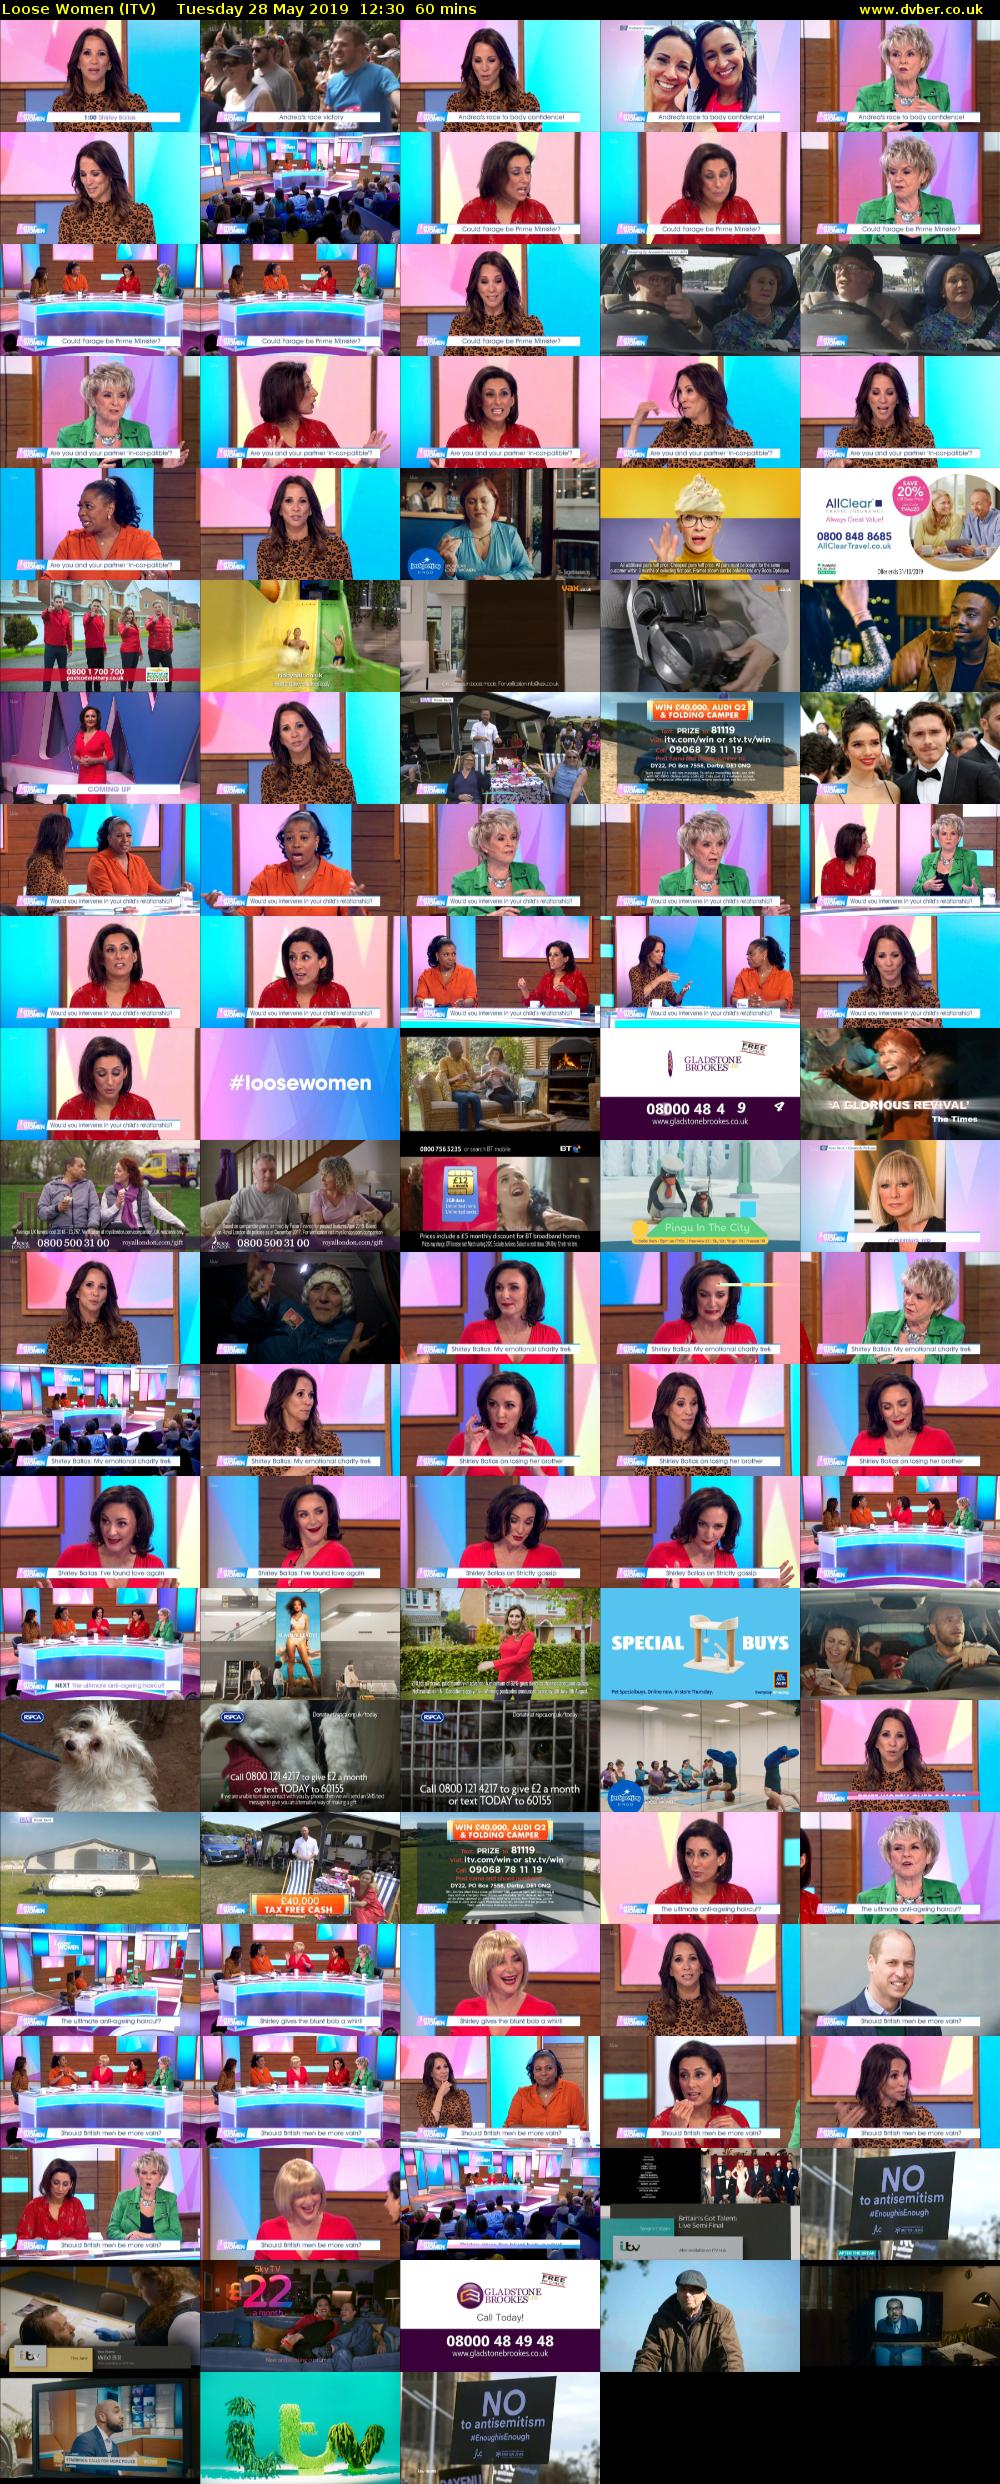 Loose Women (ITV) Tuesday 28 May 2019 12:30 - 13:30